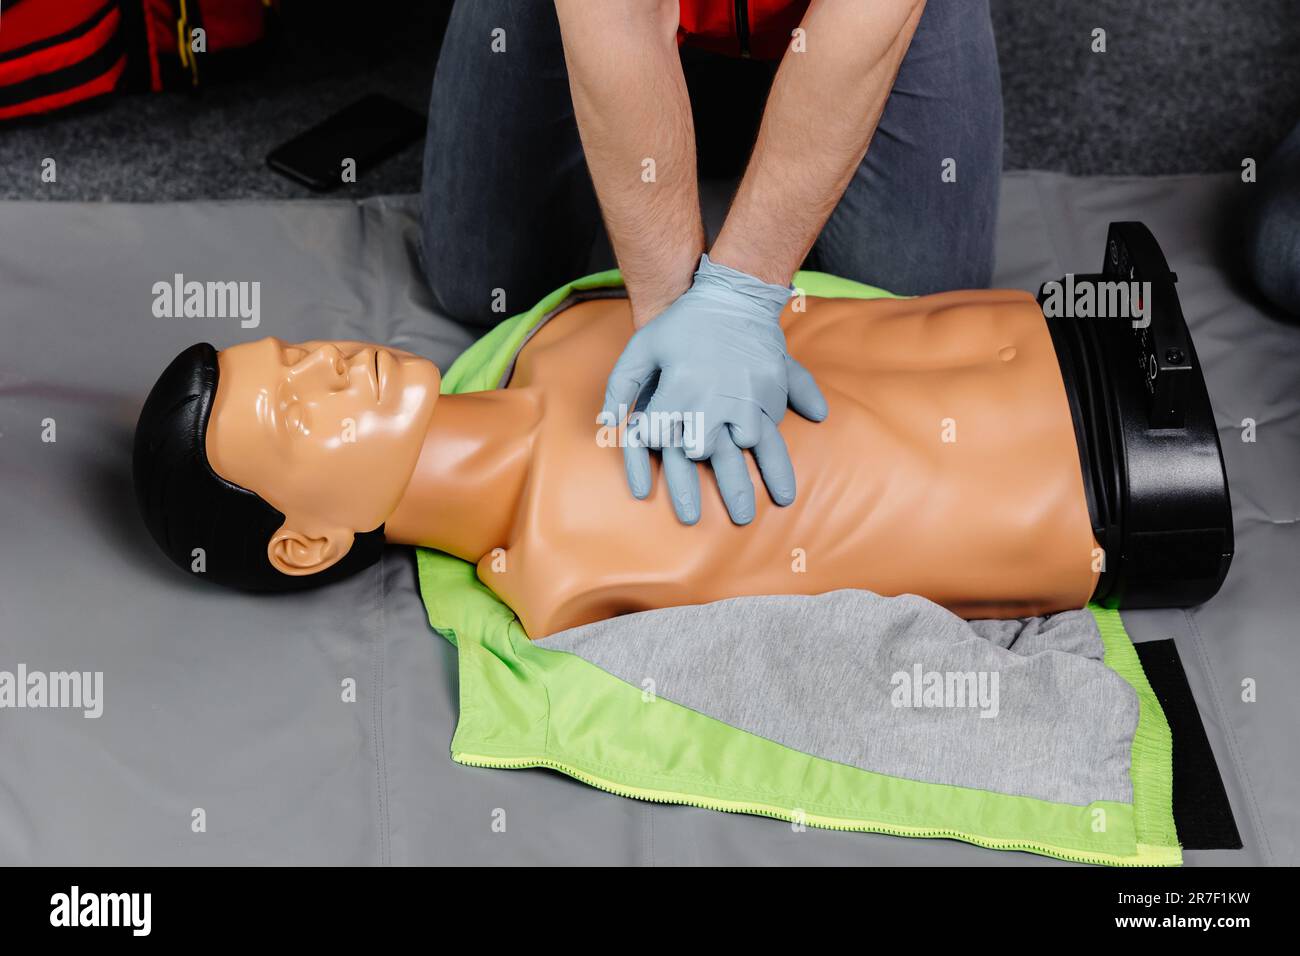 First Aid Training - Cardiopulmonary resuscitation. First aid course on cpr dummy Stock Photo